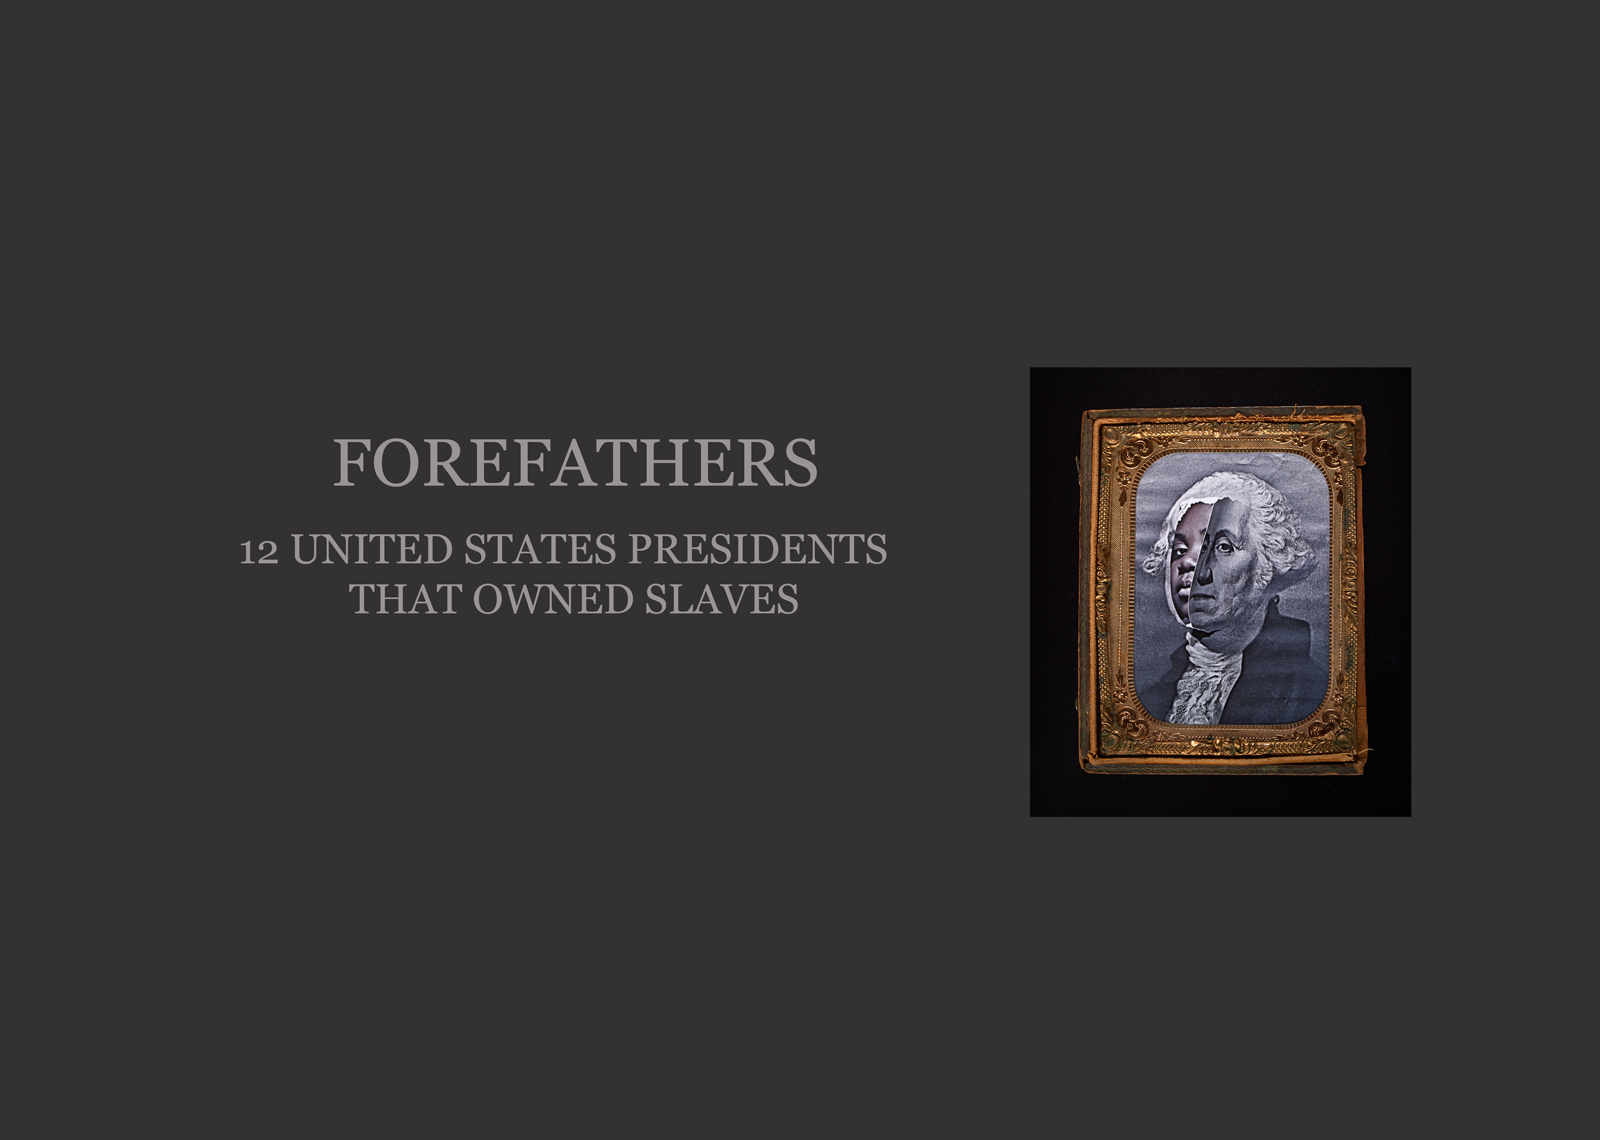 FR3_FOREFATHERS_TITLE